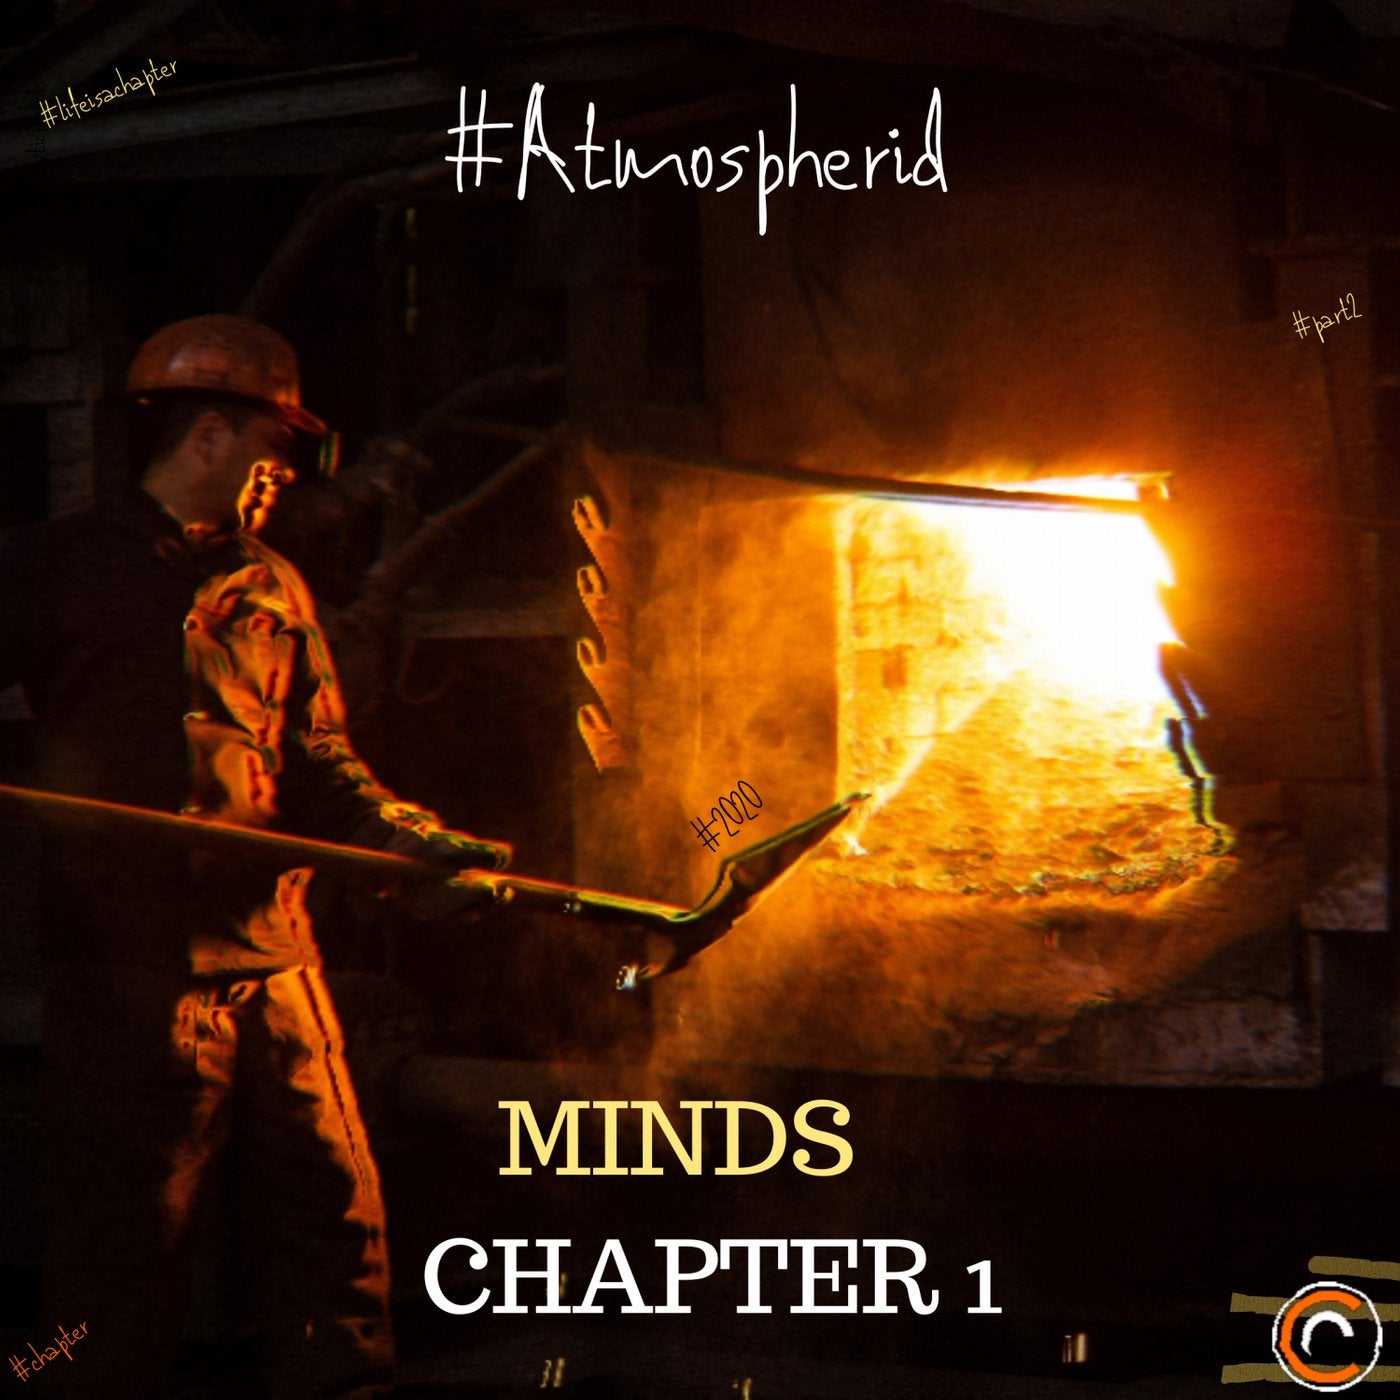 Minds, Chapter 1